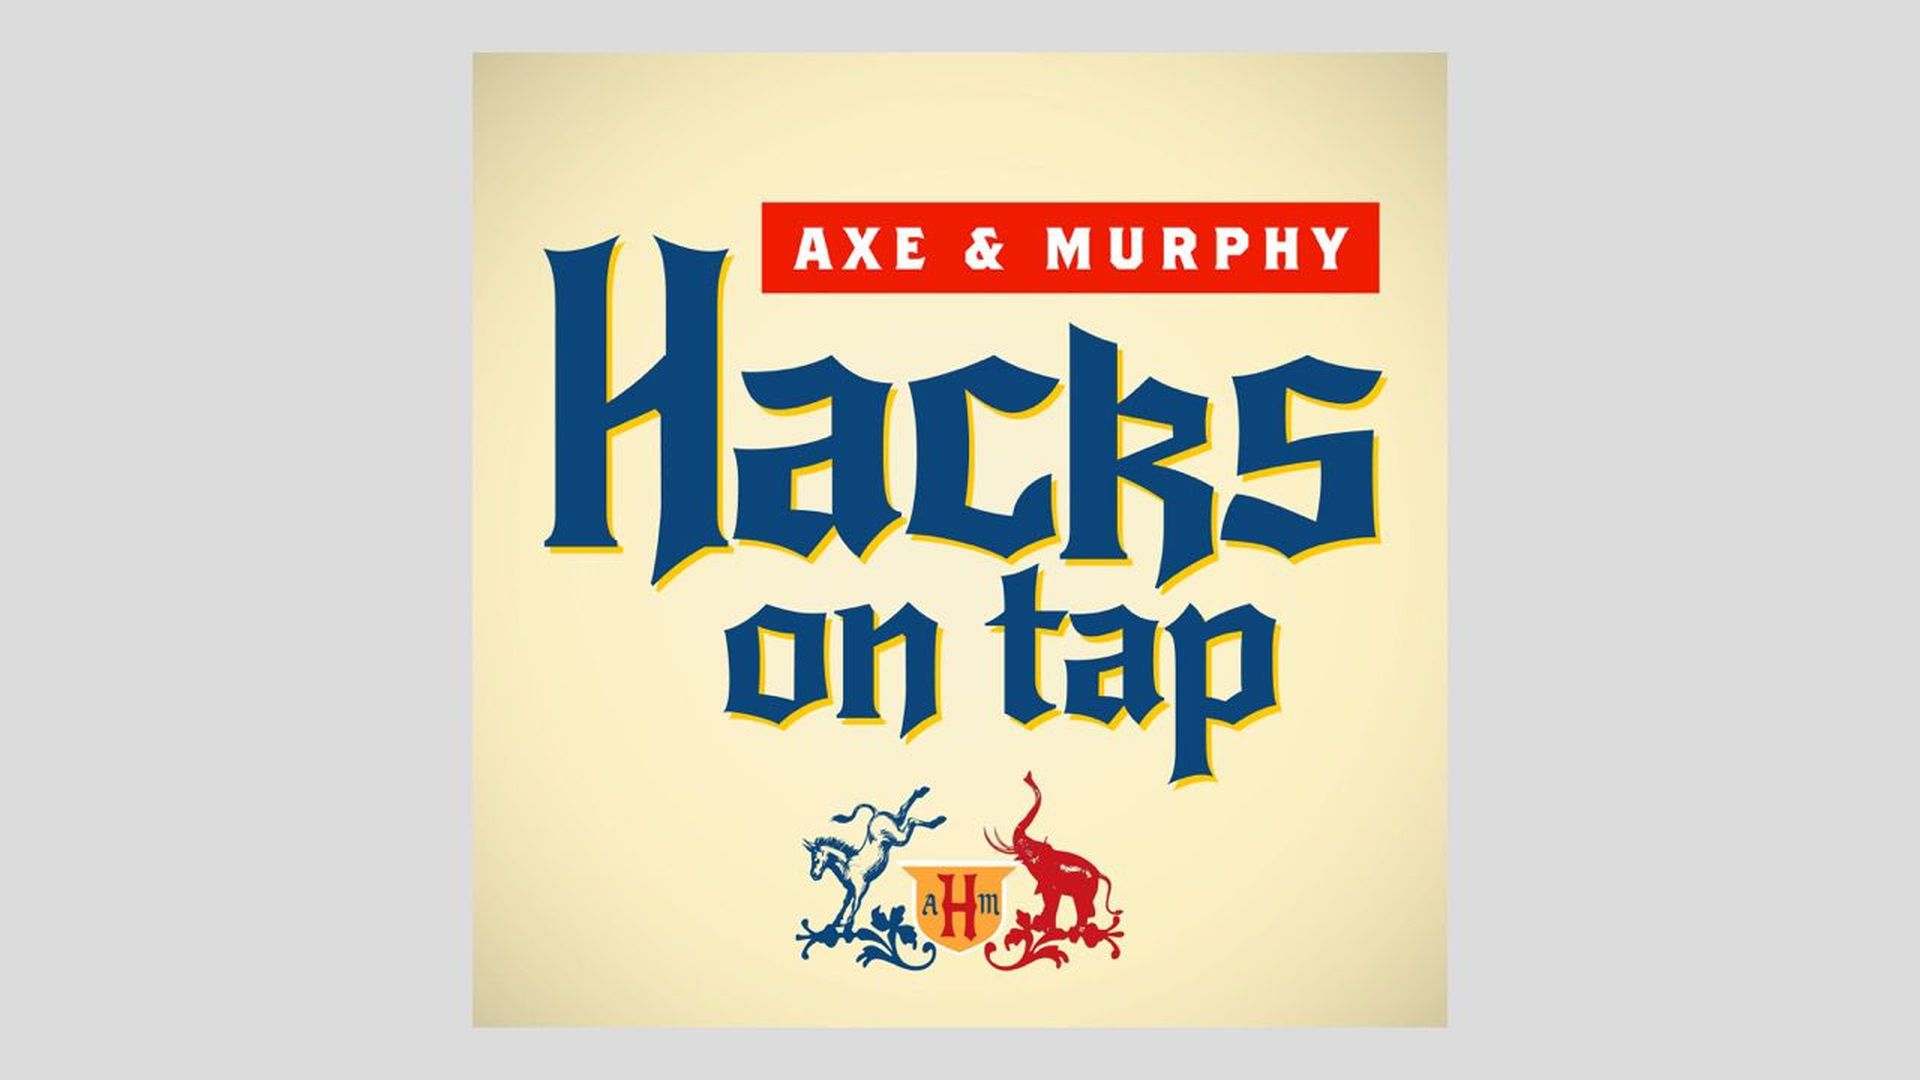 This image is a screenshot of an ad that reads "Axe & Murphy;" Hacks on tap